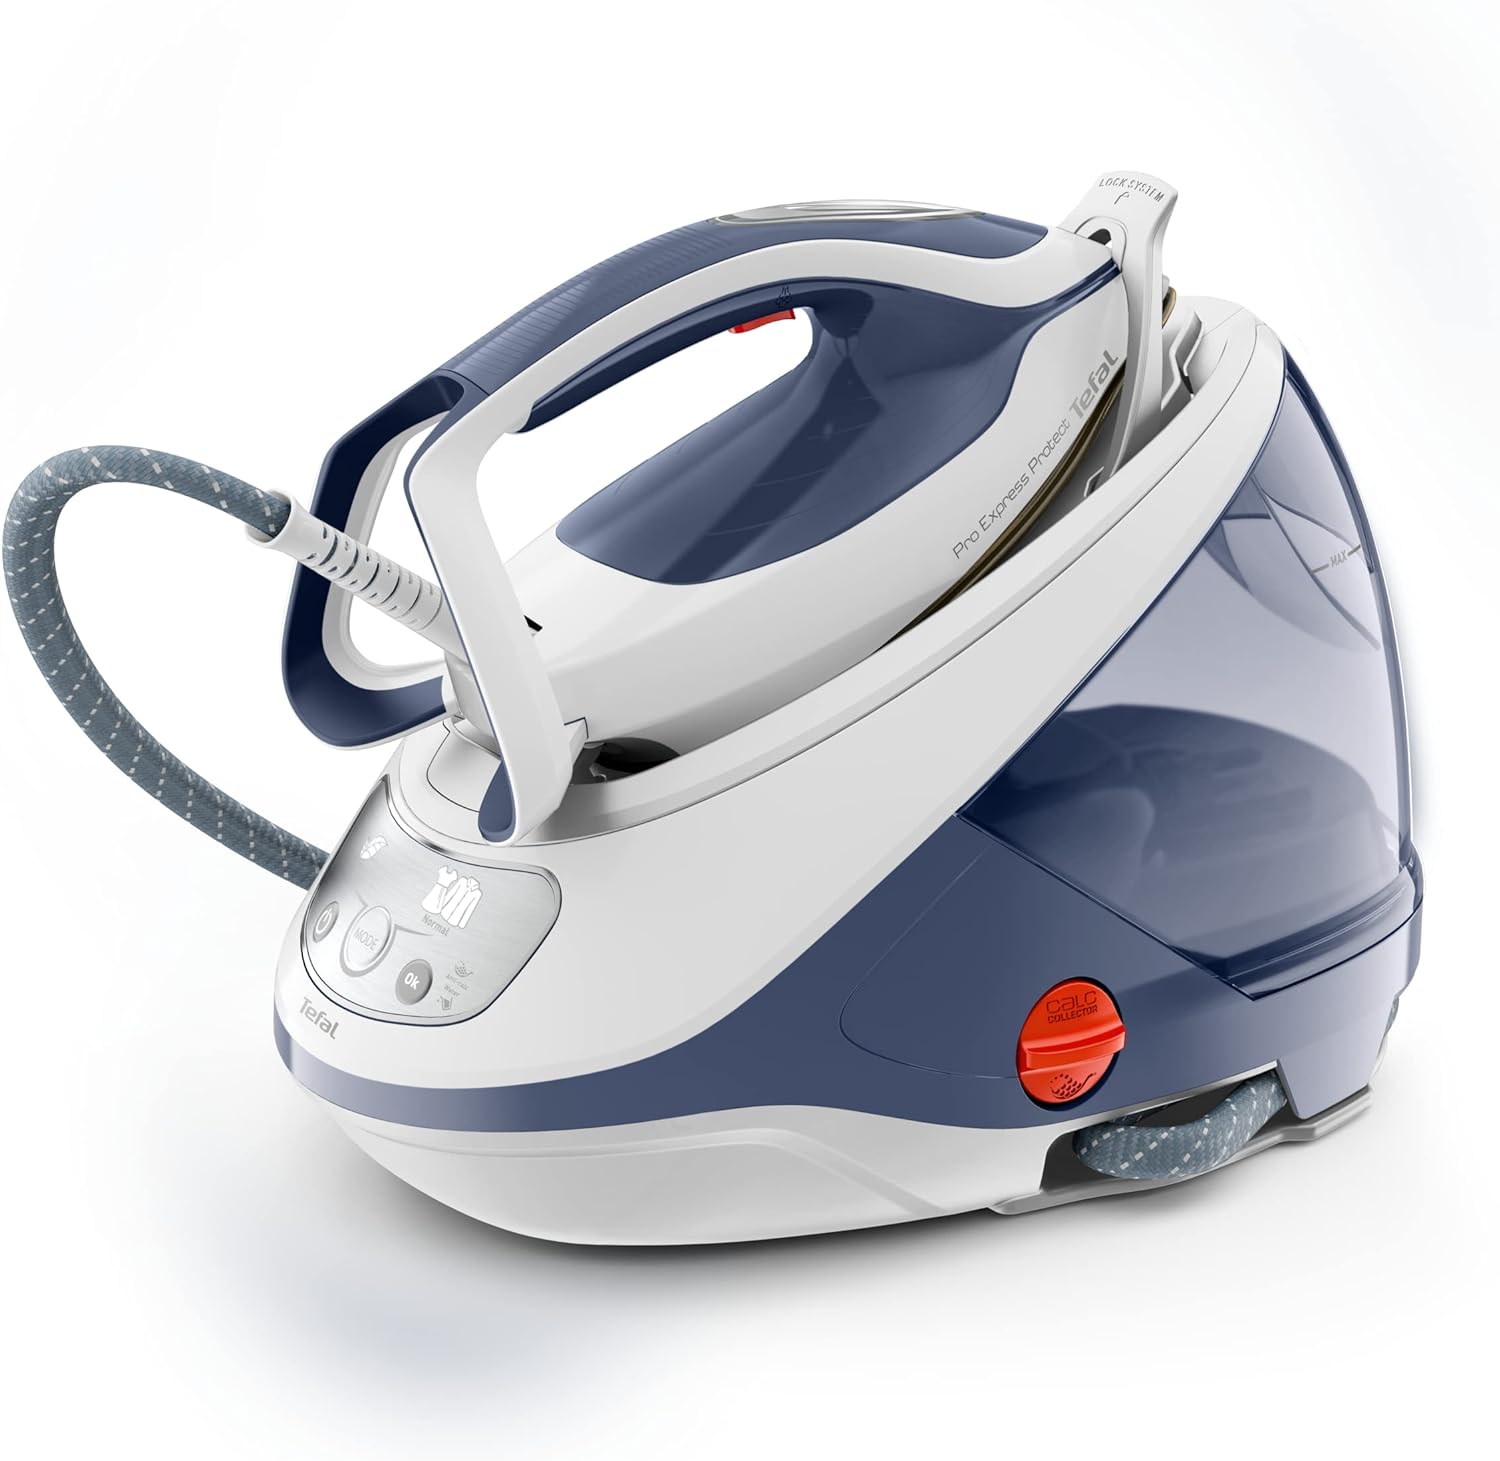 Tefal ProExpress Protect Steam Generator Iron, 7.5-Bar High Pressure, 560g/min Steam Boost, 135g/min Steam Output, No-Setting Technology, Anti-Drip Protection, Excellent Soleplate, Blue & White,GV9224